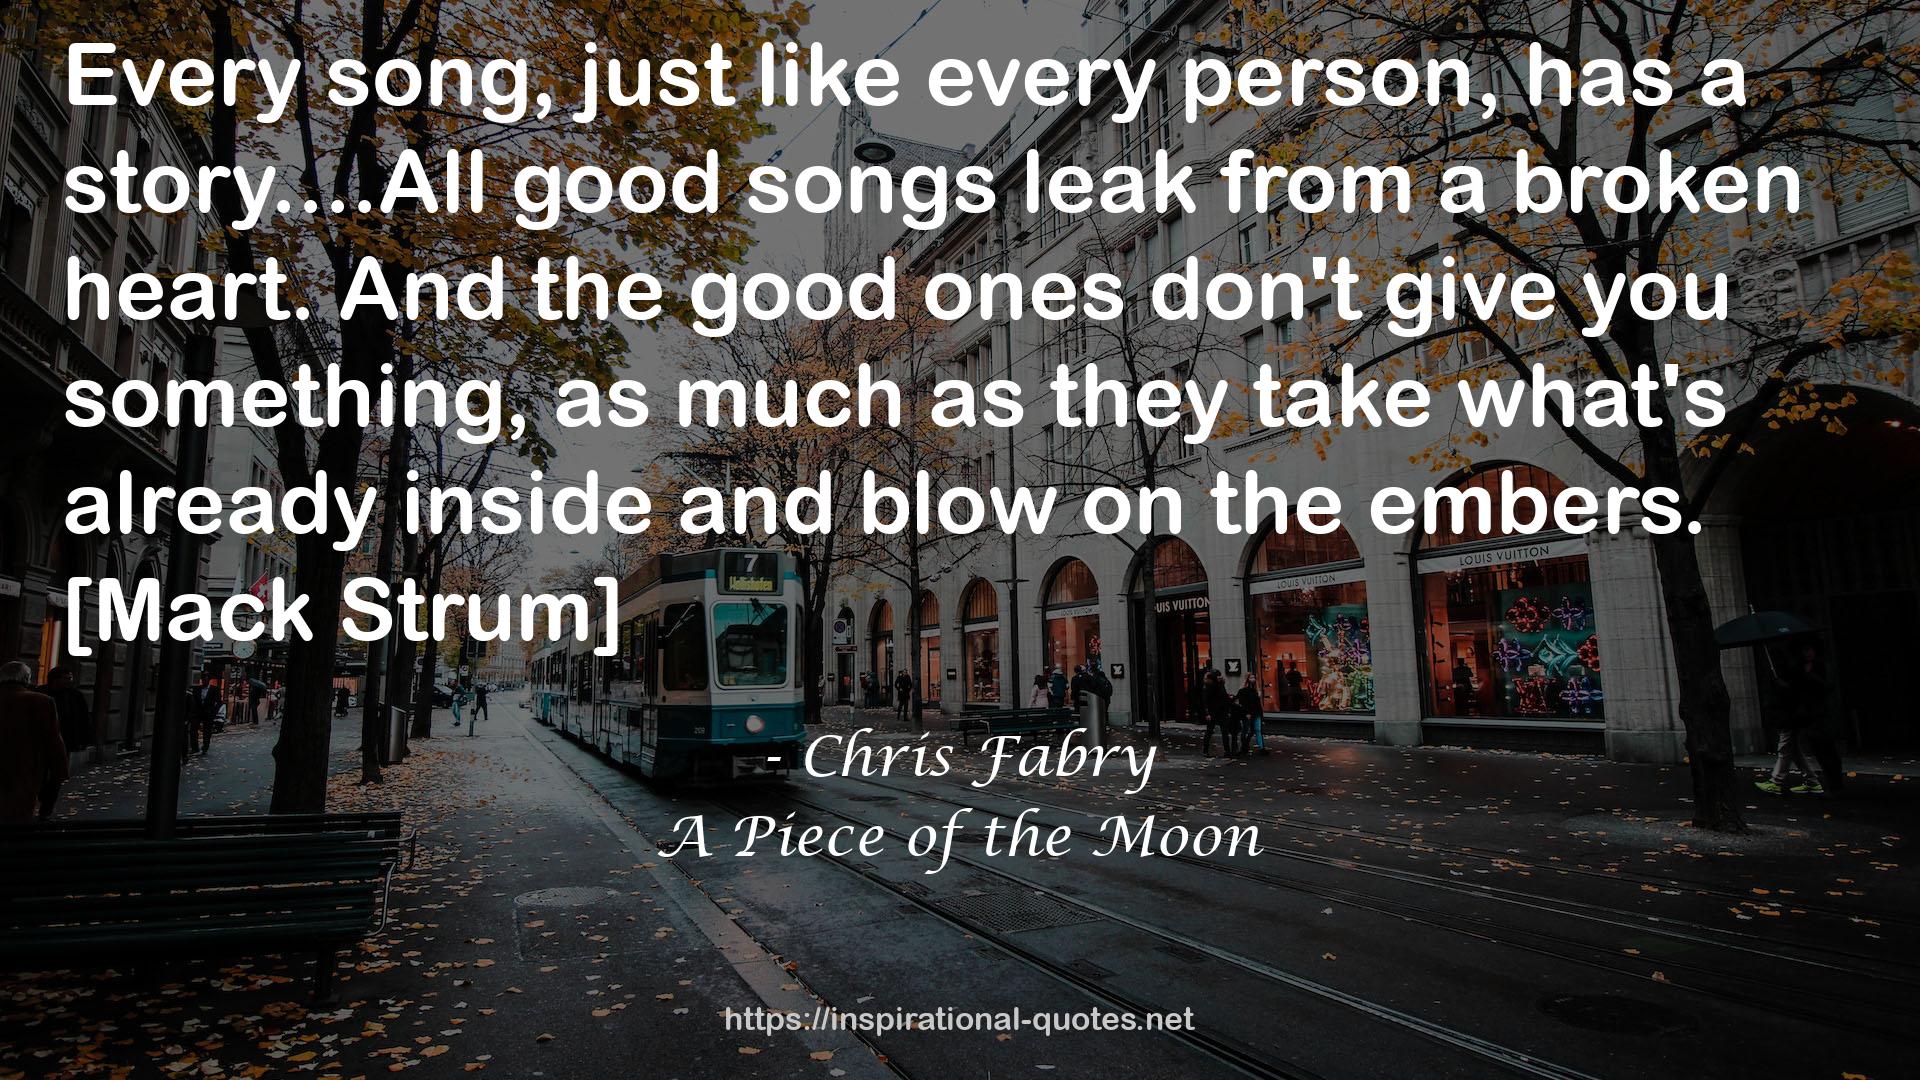 A Piece of the Moon QUOTES